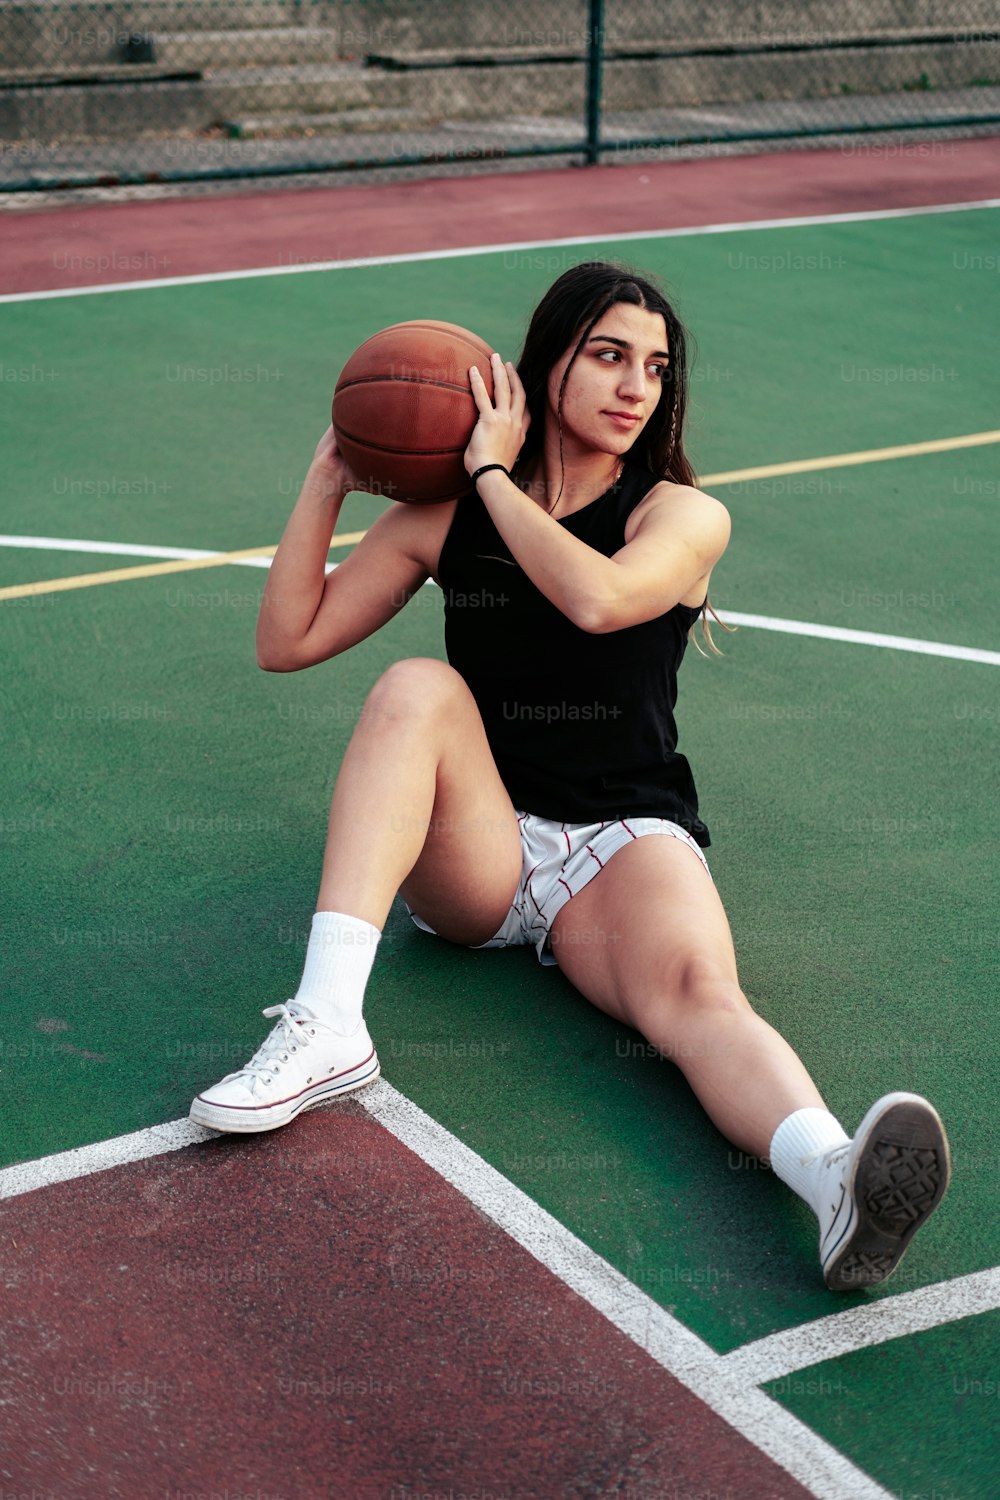 a woman sitting on a tennis court holding a basketball